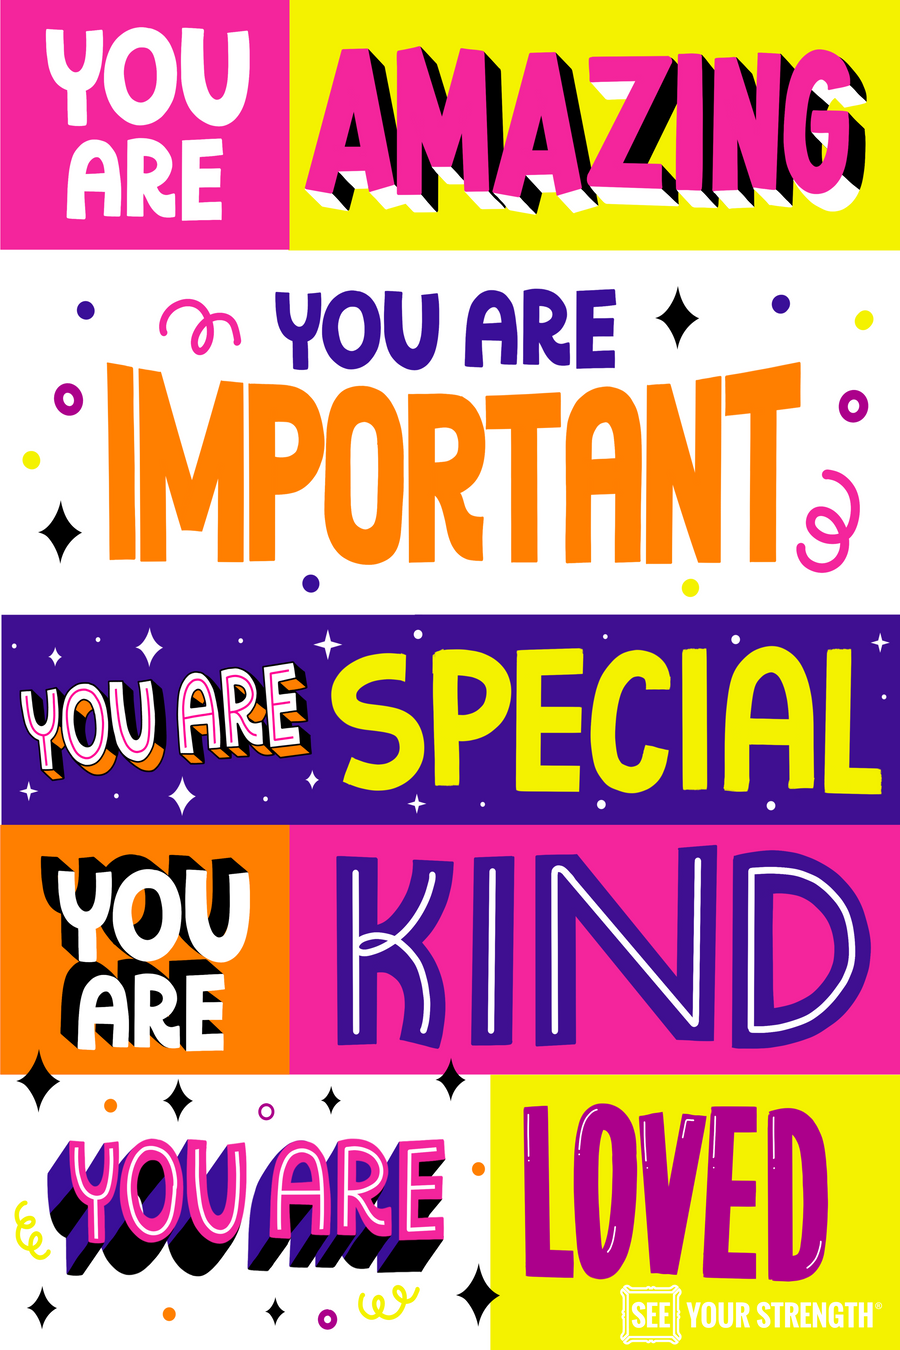 You are amazing You are important You are special You are kind You are loved